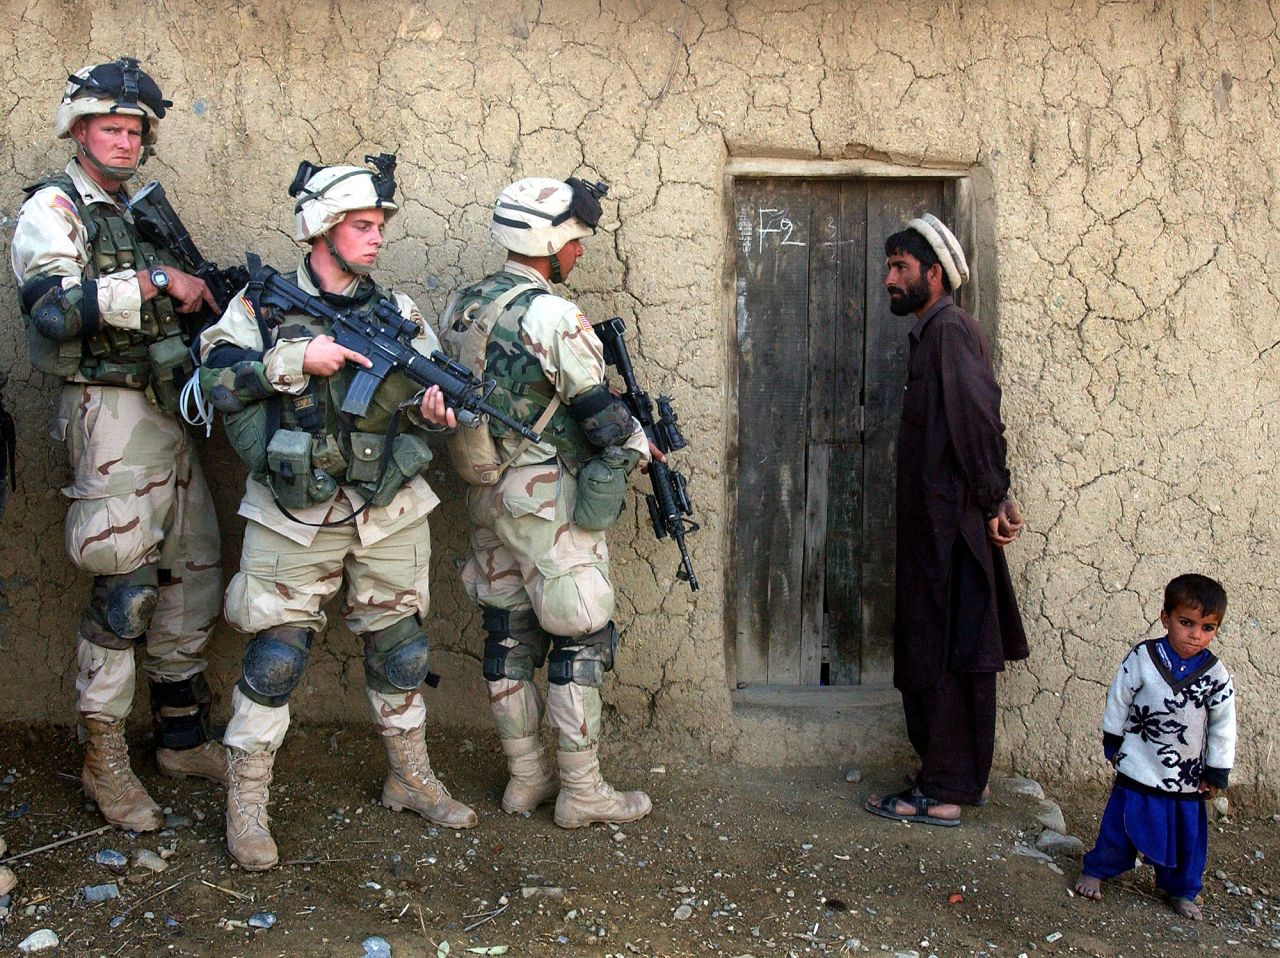 A man and his son watch US soldiers prepare to sweep their home in southeastern Afghanistan in November 2002.